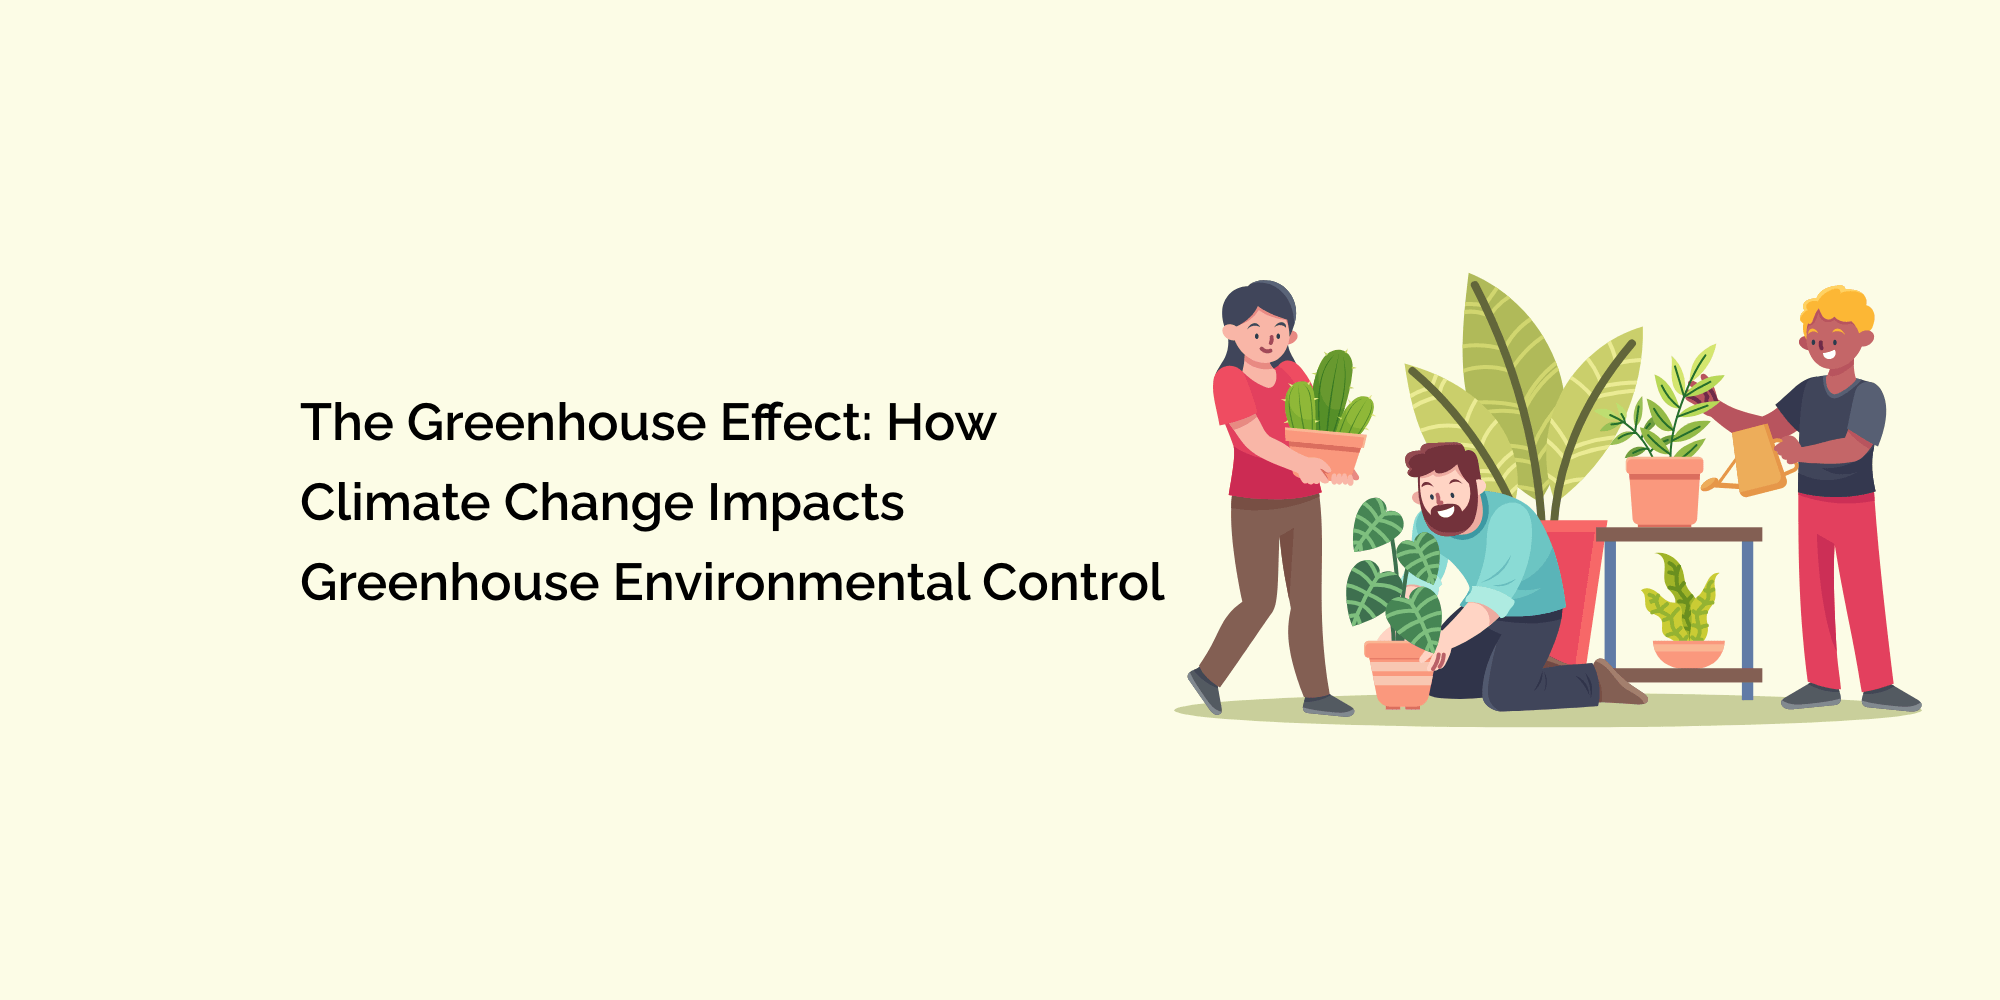 The Greenhouse Effect: How Climate Change Impacts Greenhouse Environmental Control